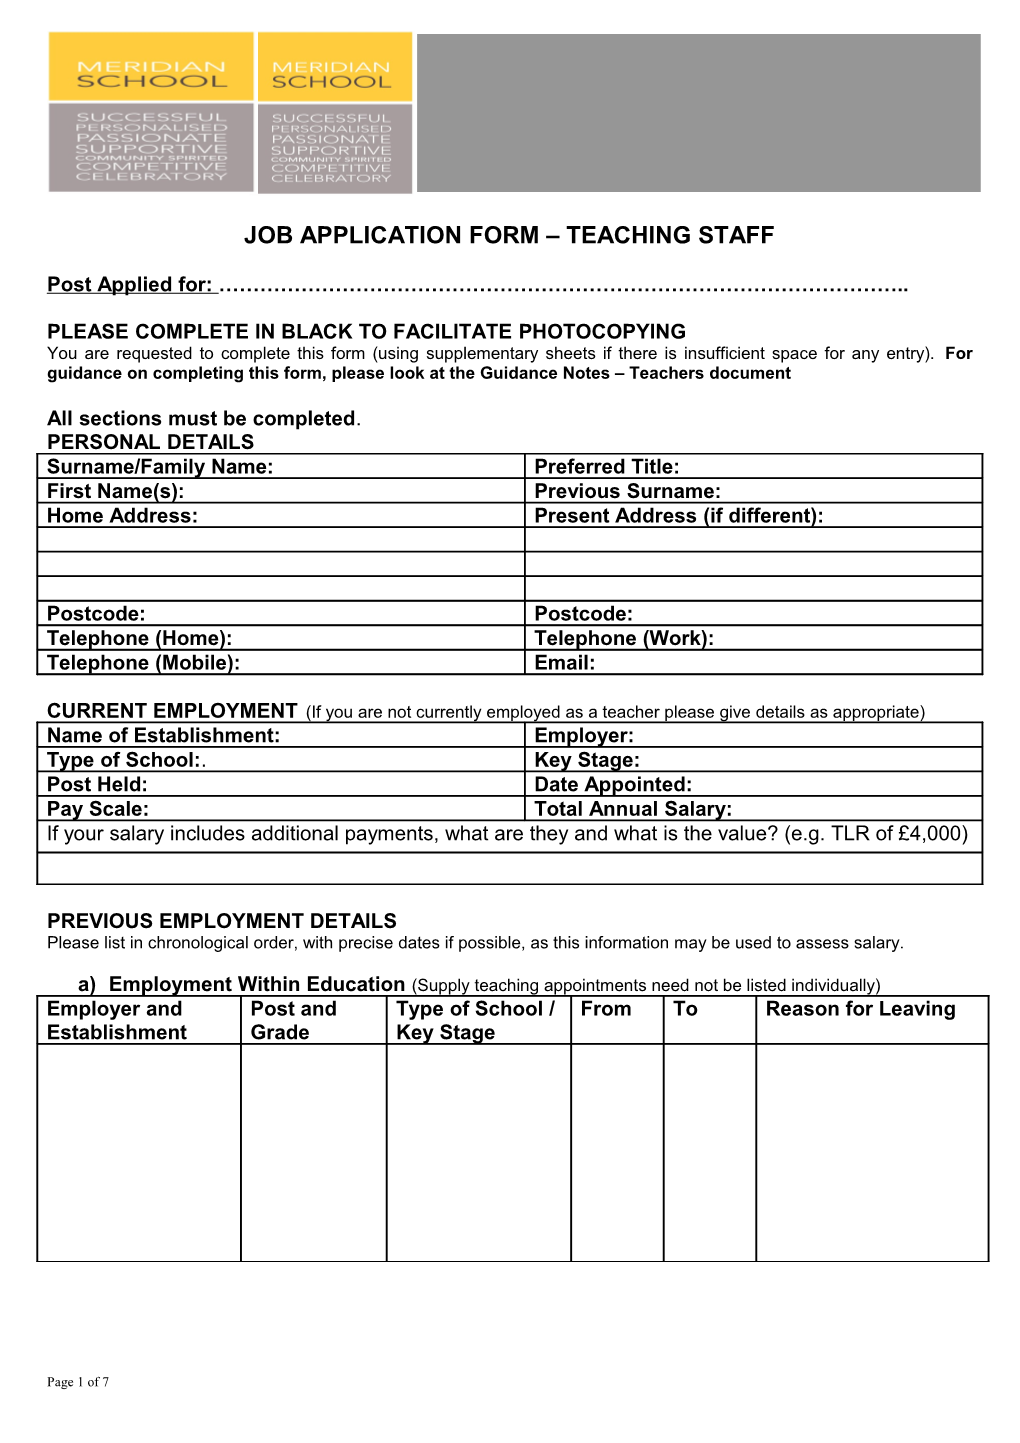 Hertfordshire County Council Job Application Form - Support Staff (Support Staff)